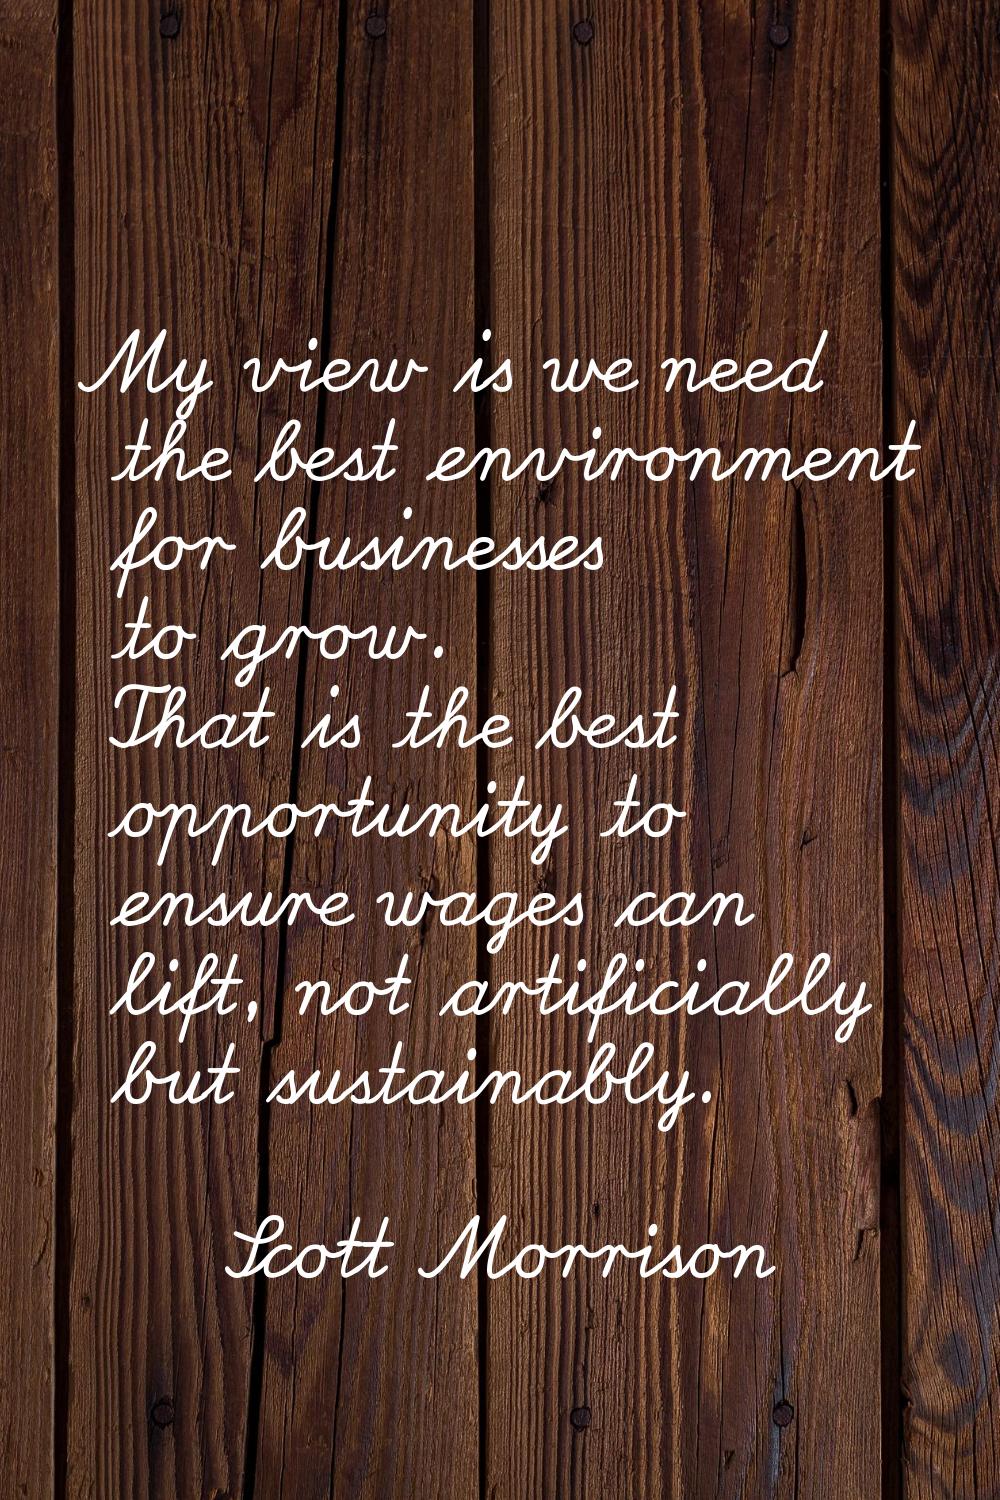 My view is we need the best environment for businesses to grow. That is the best opportunity to ens